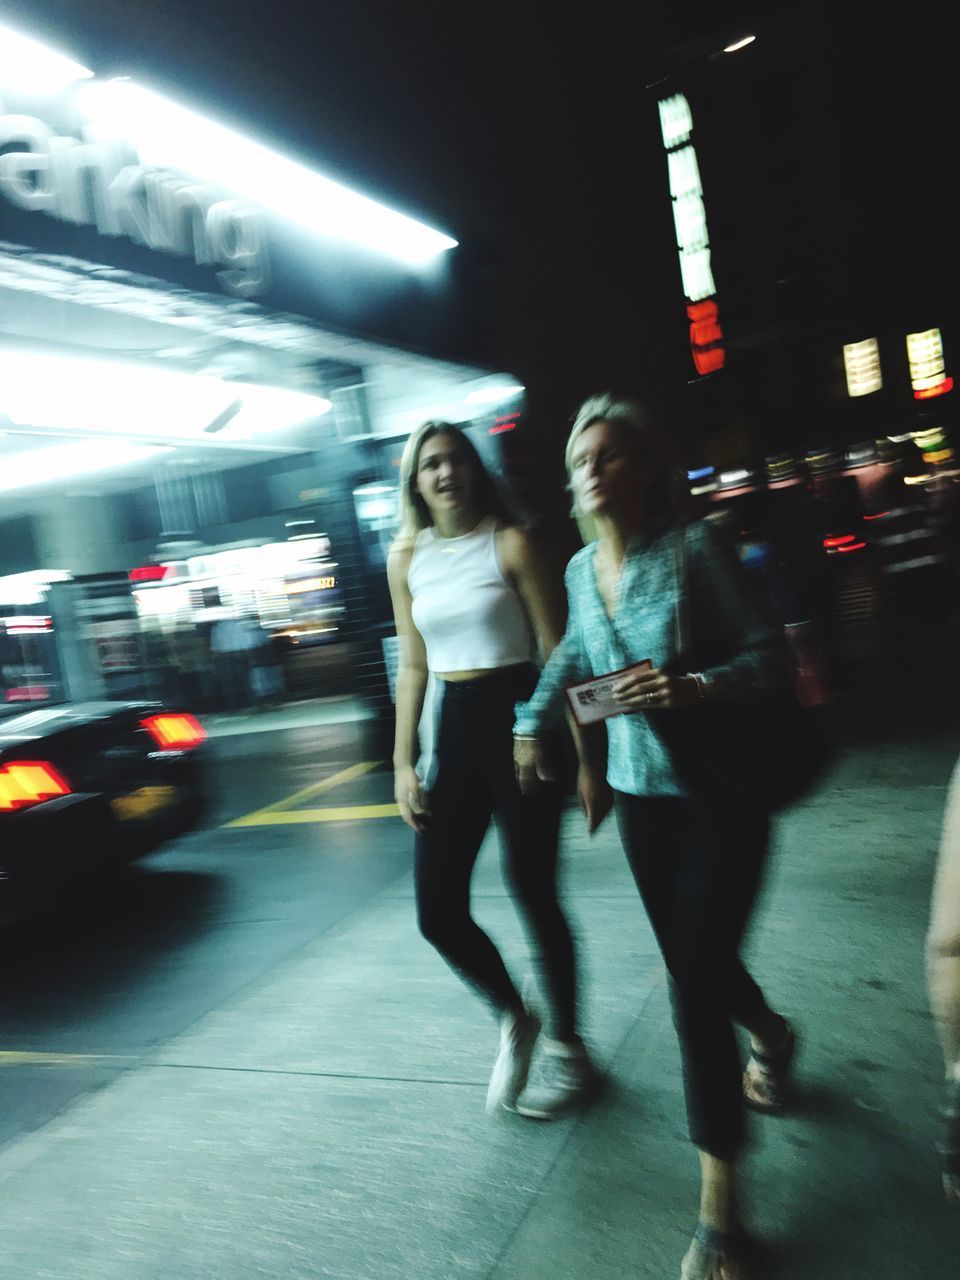 blurred motion, motion, on the move, transportation, walking, full length, night, street, mode of transport, city, illuminated, public transportation, city life, road, speed, land vehicle, car, lifestyles, travel, casual clothing, young women, outdoors, subway station, footpath, person, well-dressed